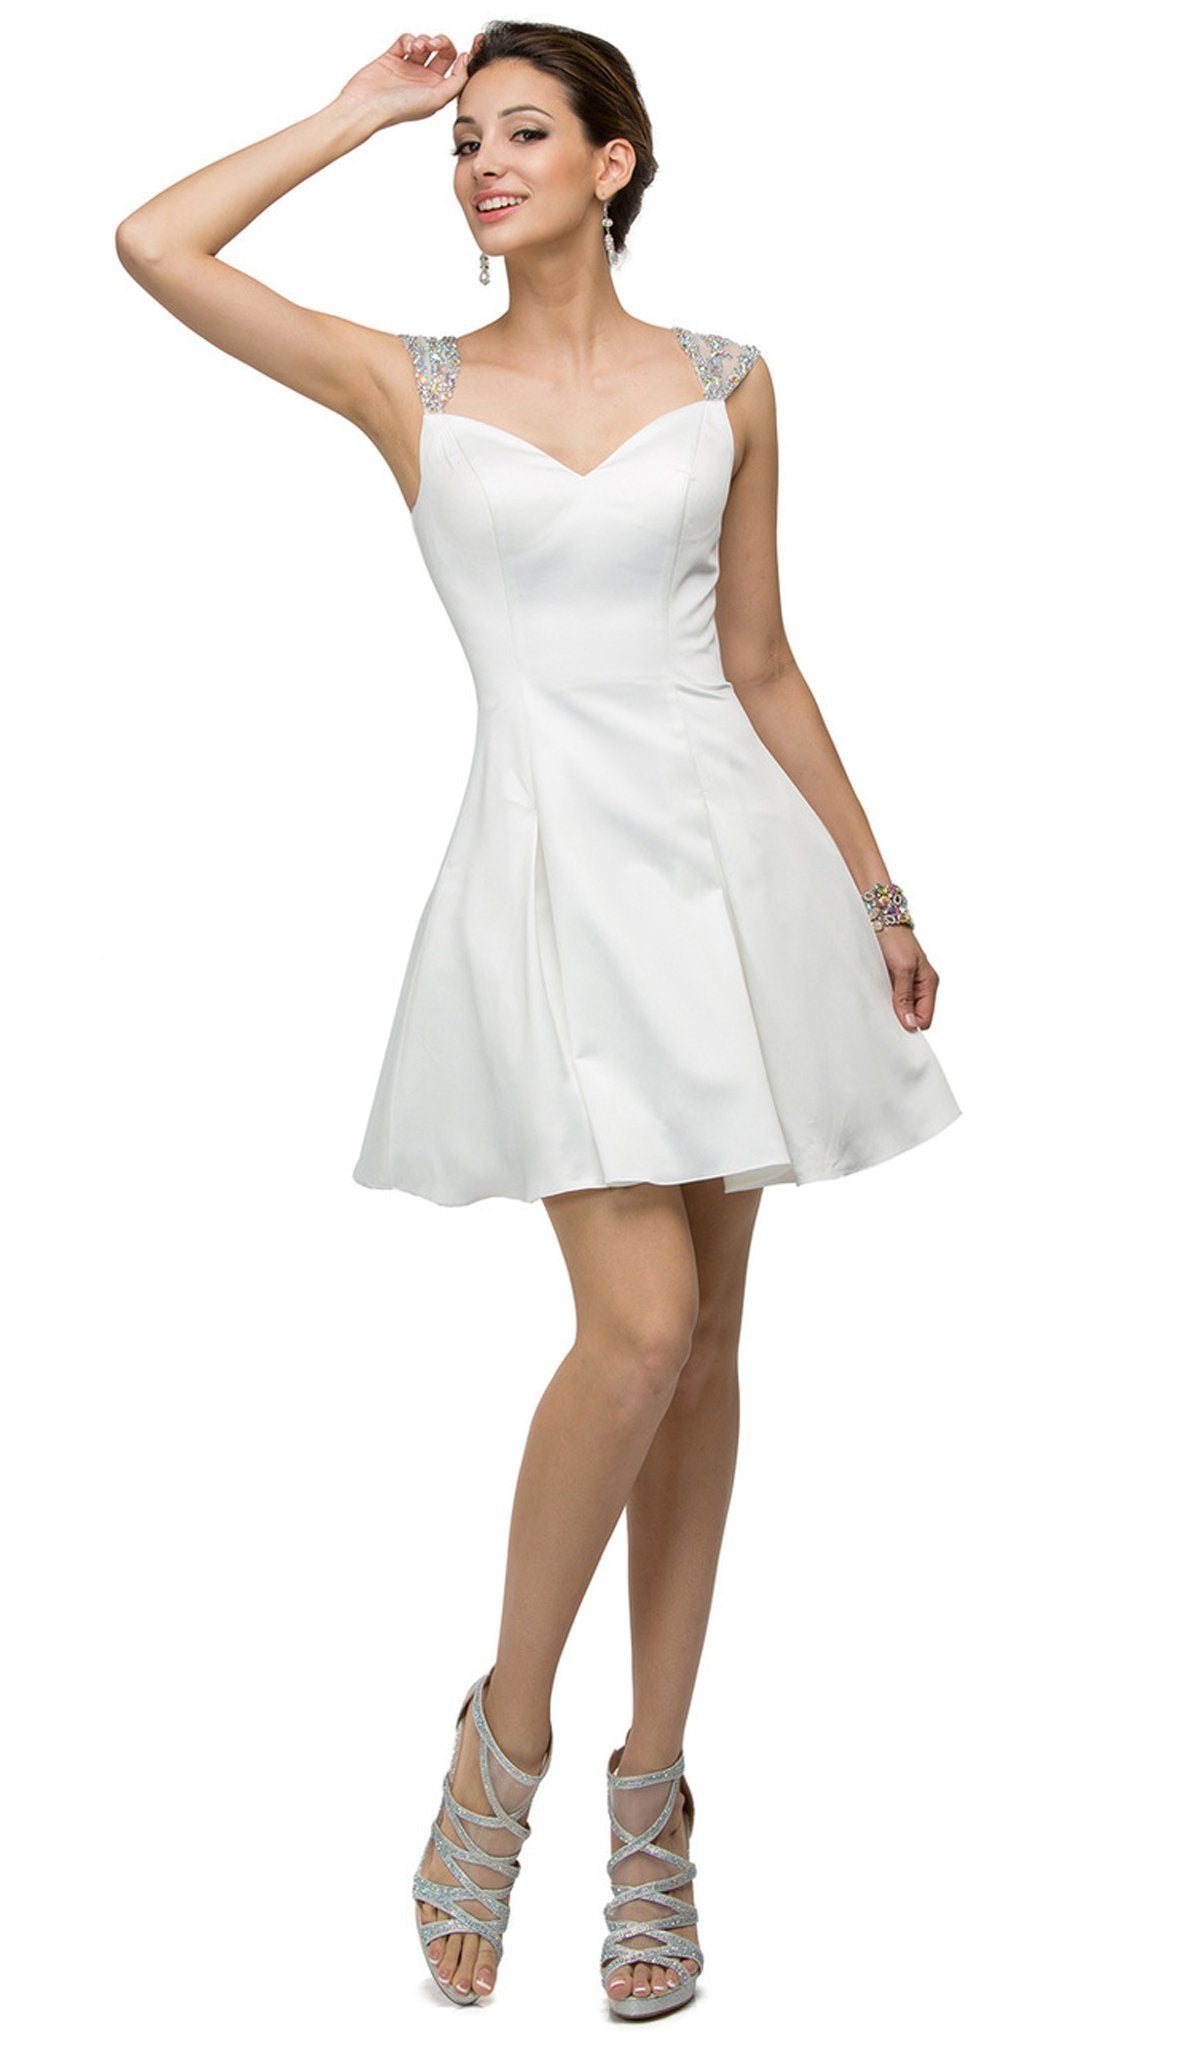 Dancing Queen - 9476 Jeweled Cap Sleeve Sweetheart Satin Cocktail Dress Cocktail Dresses XS / White